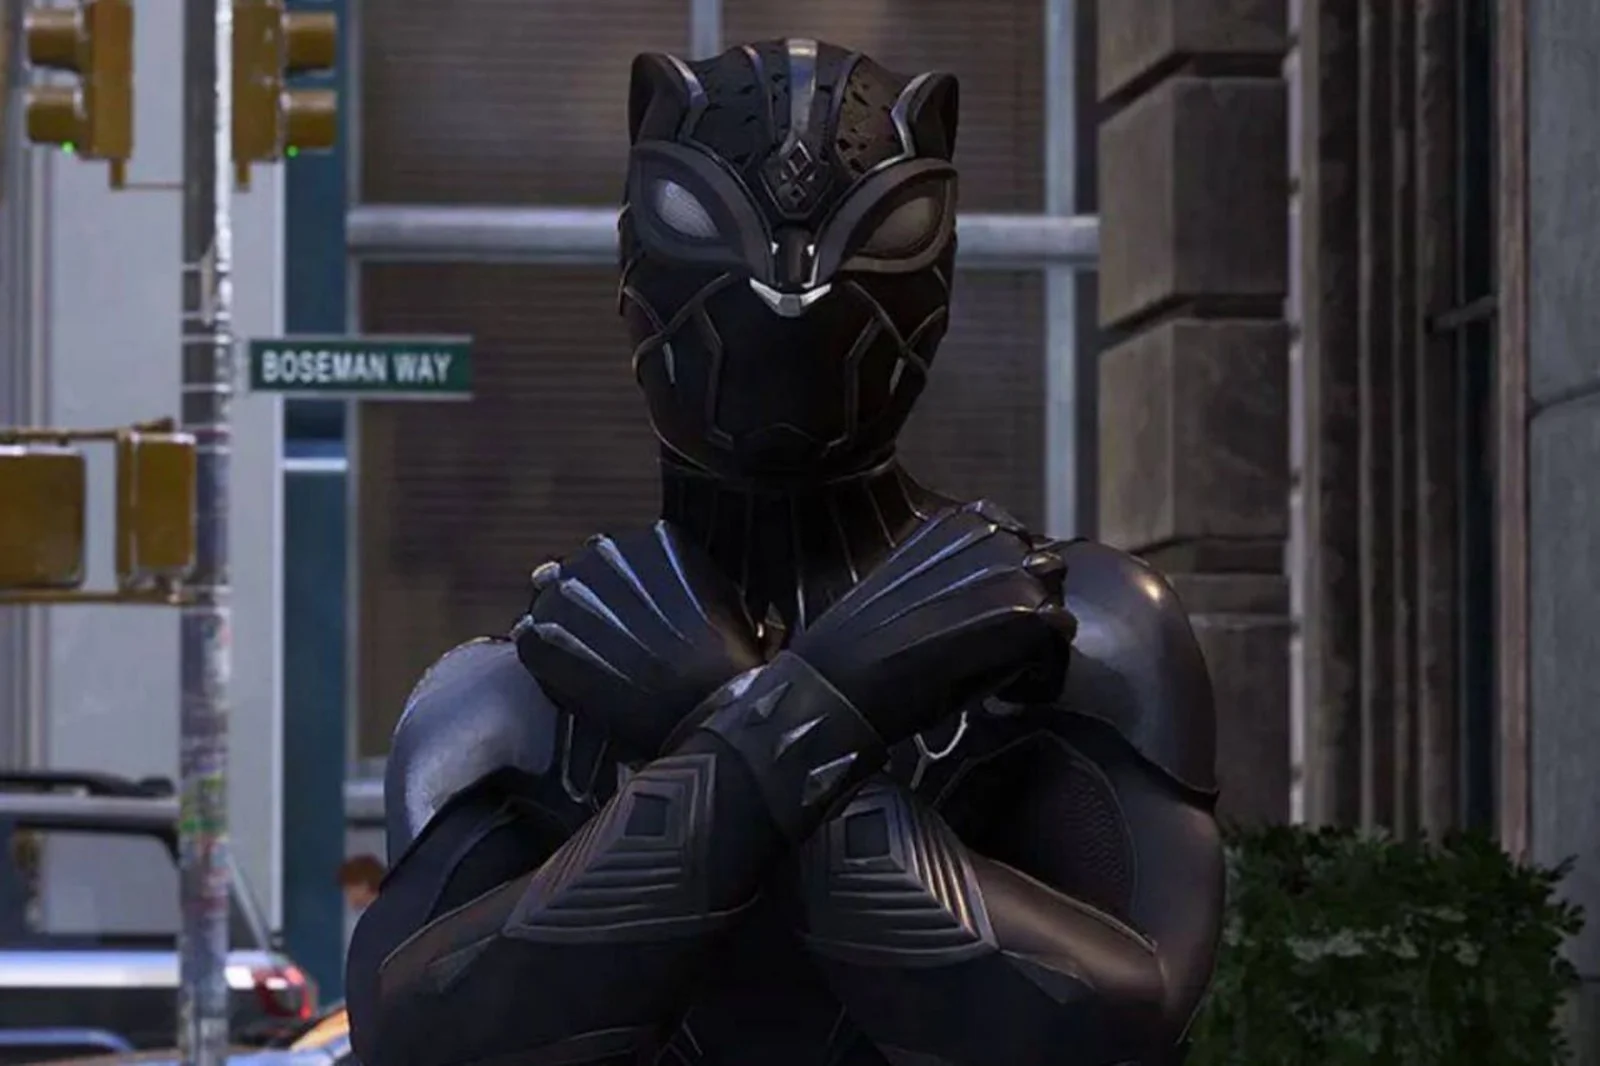 The creators of Marvel's Spider-Man 2 paid tribute to the memory of Chadwick Boseman